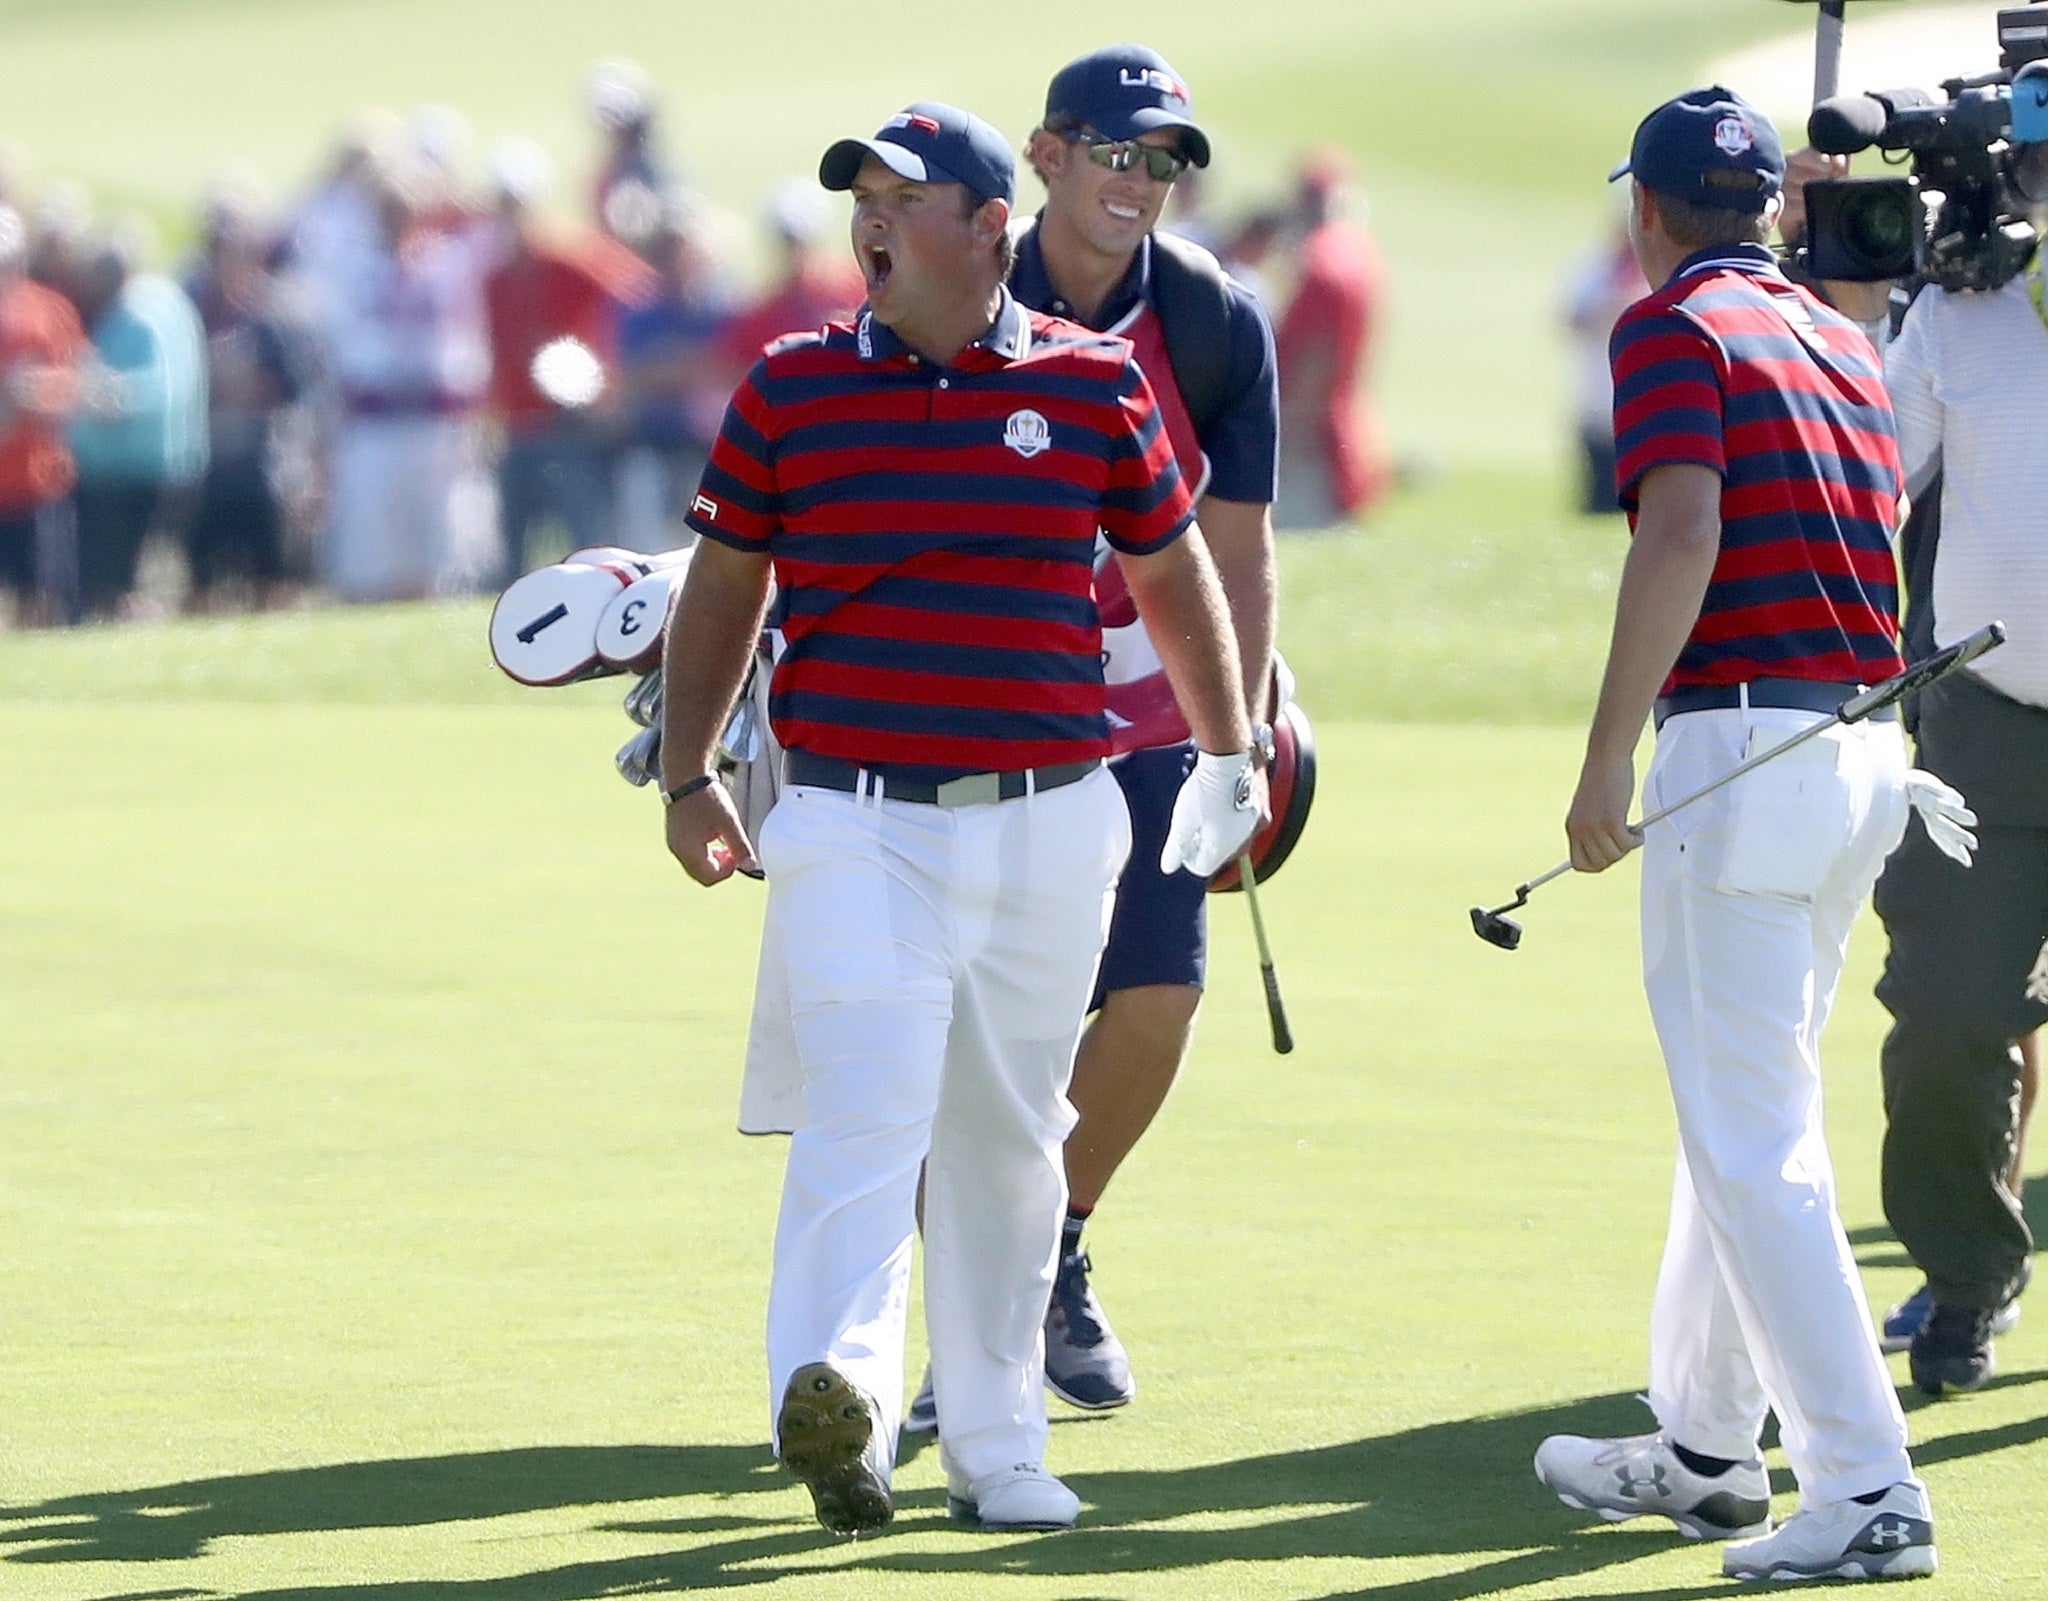 Patrick Reed was in fine form on Saturday to help extend America's lead